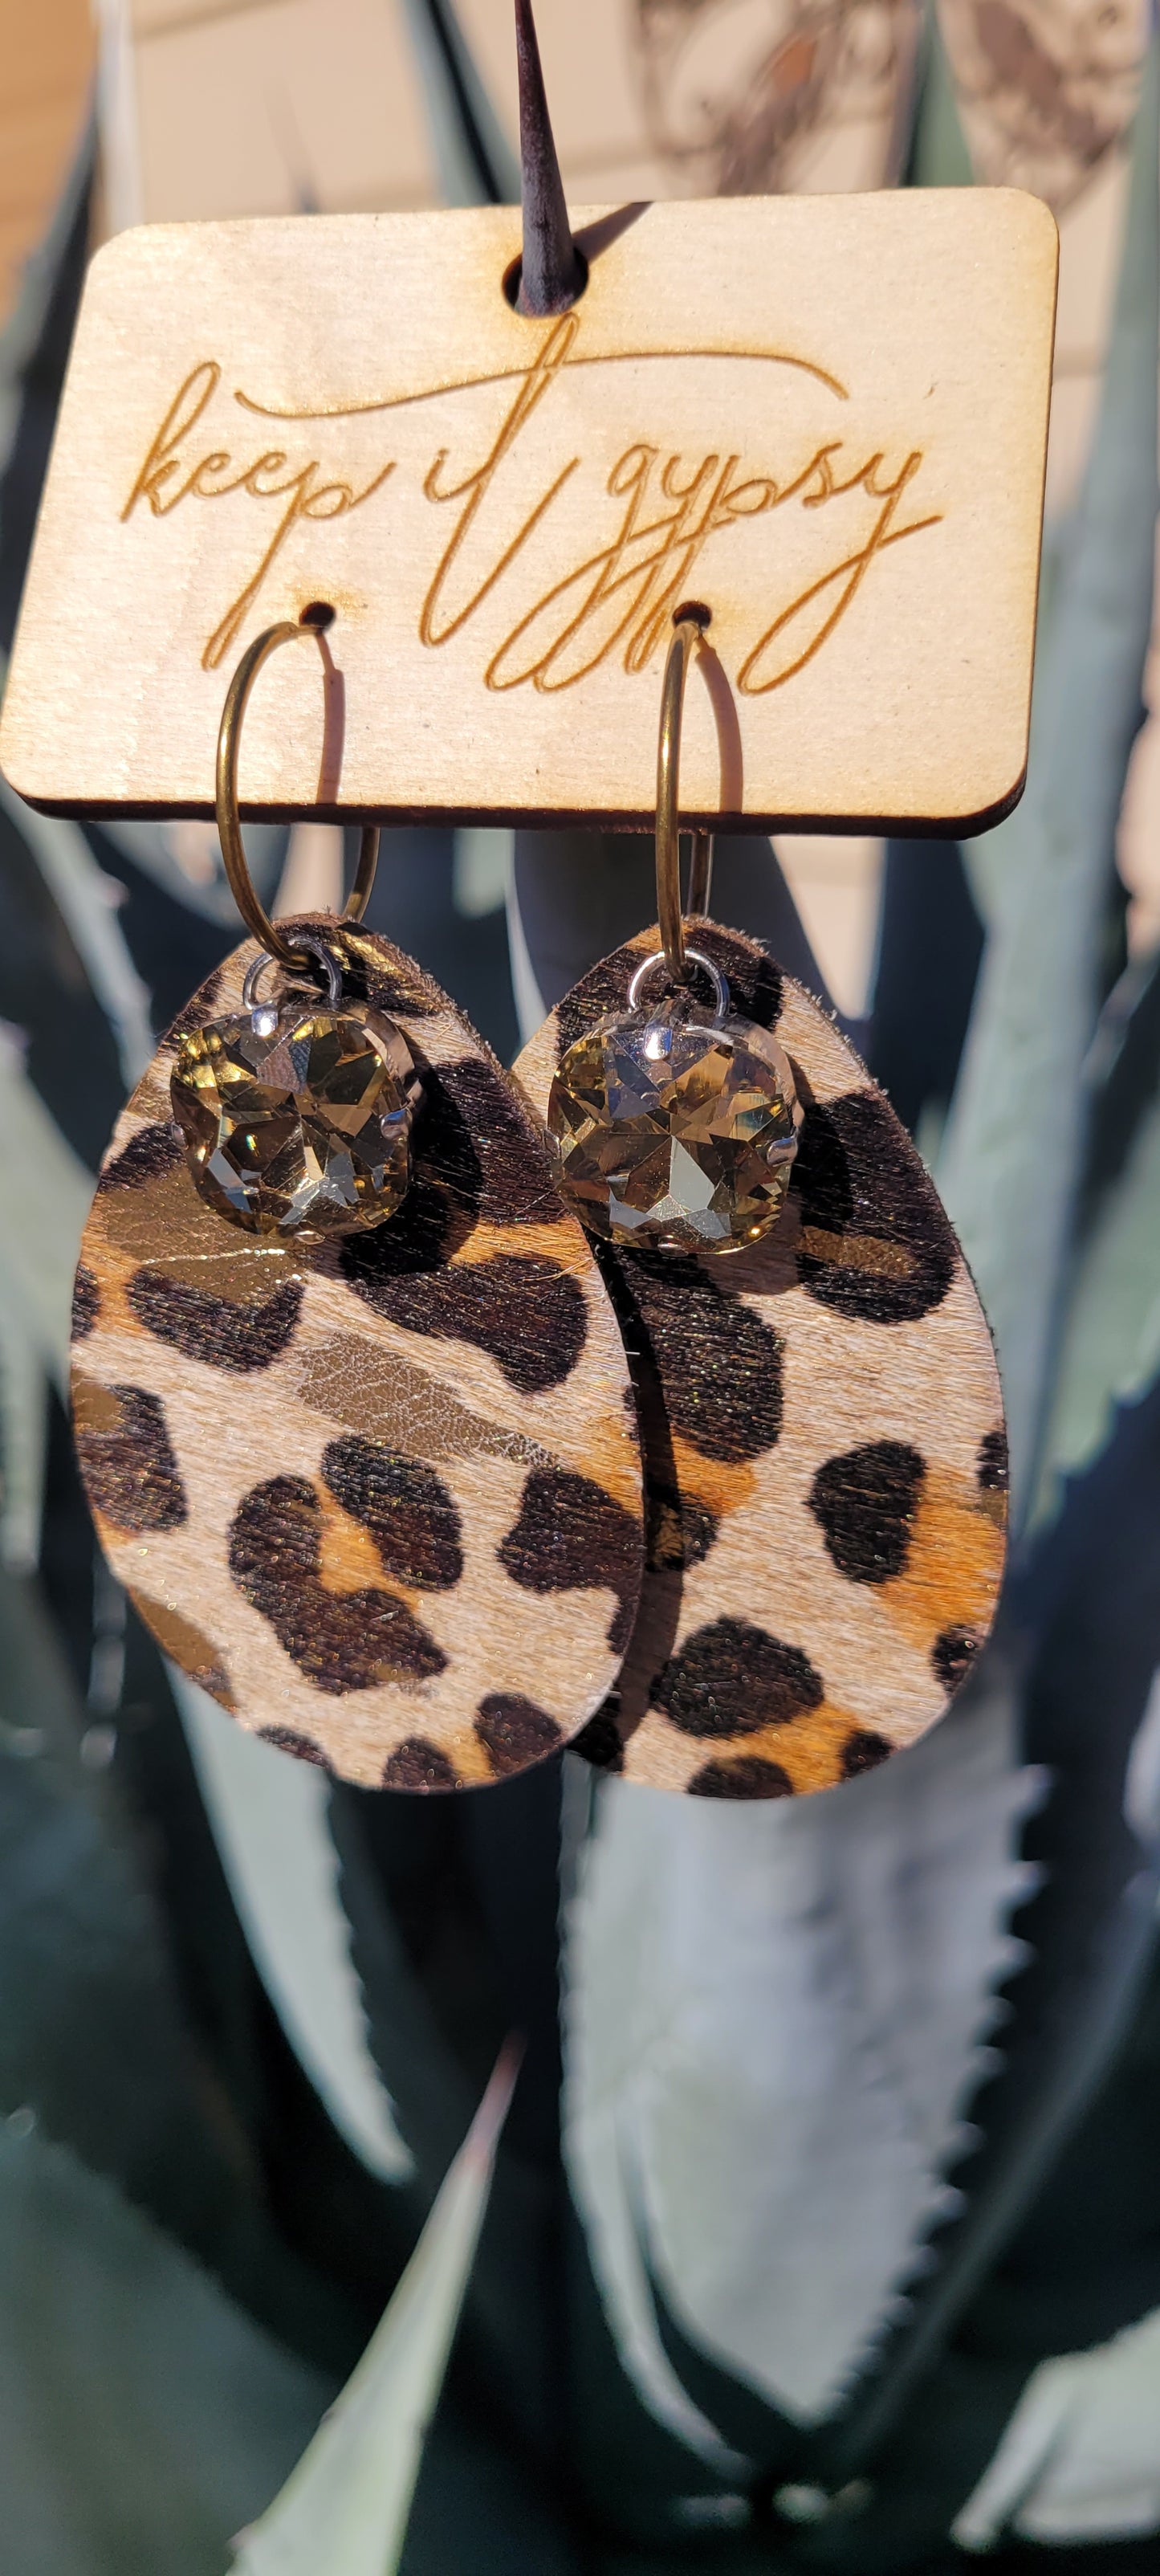 Upcycled Leather Leopard Print Cowhide Earrings Light Gold Crystals Brown, Camel, Black & Metallic Gold Limited supply!    Due to the nature of leather/suede, small variances of color in the skin may occur, this is in no way considered a defect. These are inherent characteristics of leather/suede and will enhance the individual look of your garment.   